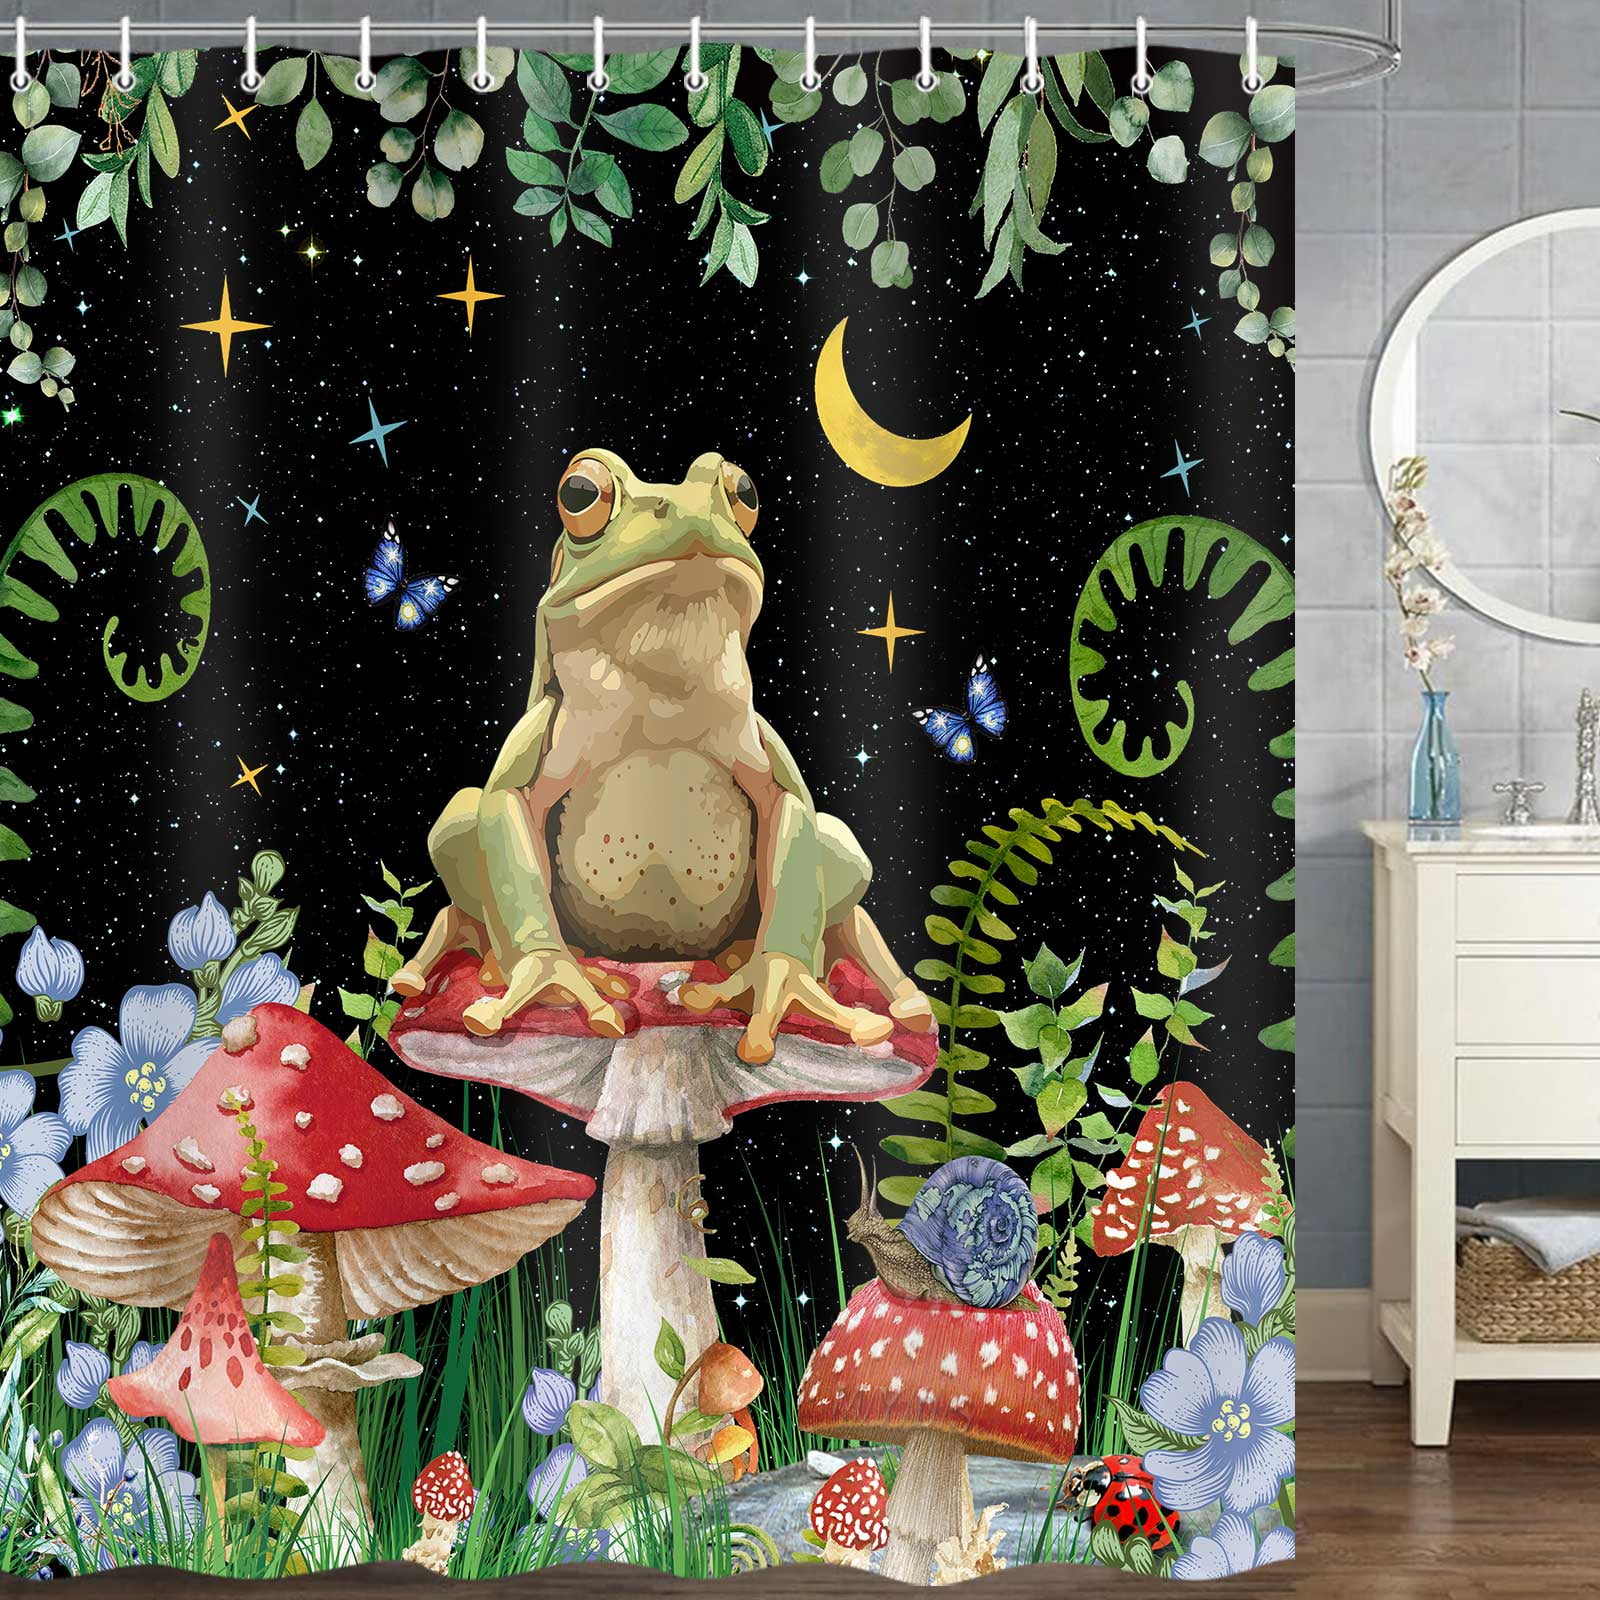 Funny Frog Boho Shower Curtain, Mushroom Butterfly Vertical Frog Aesthetic  Moon Bath Curtain, Green Floral Botanical Cottagecore Cloth Shower Curtains